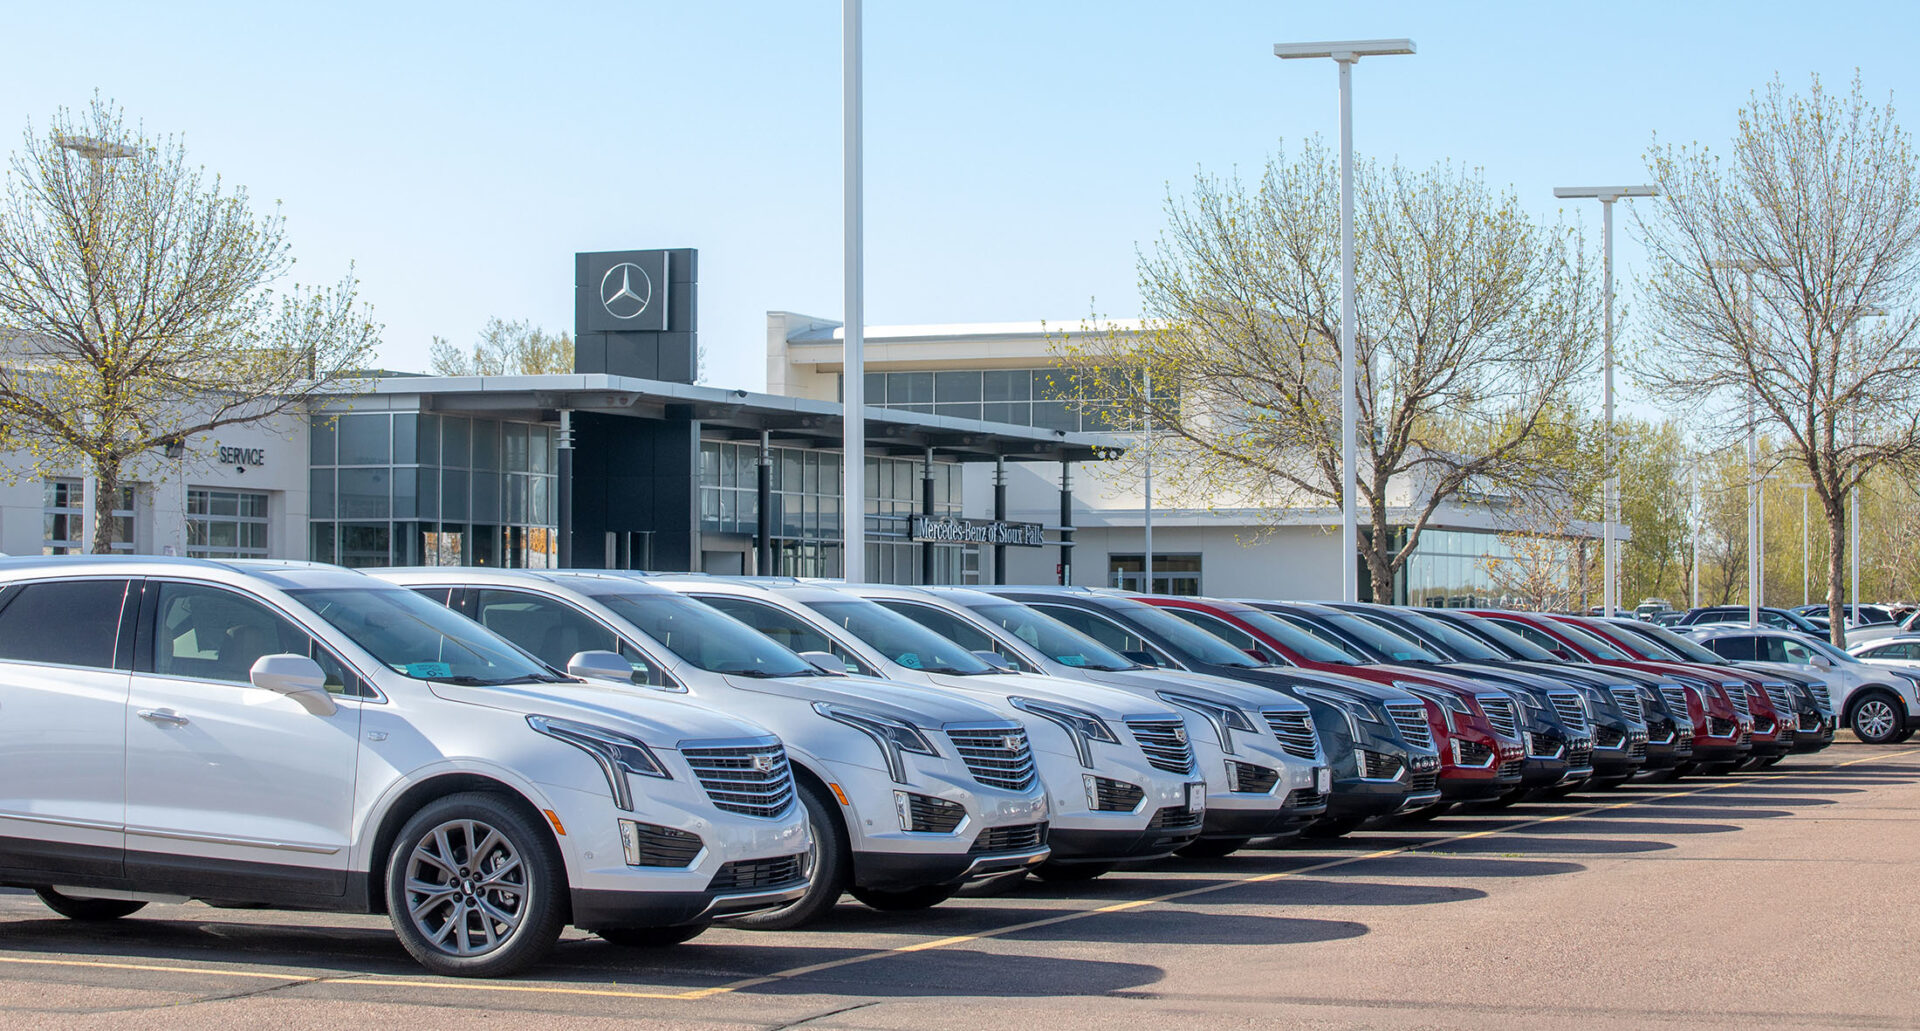 The Return Of The Suv Demand New Models Hit Record Levels Siouxfalls Business